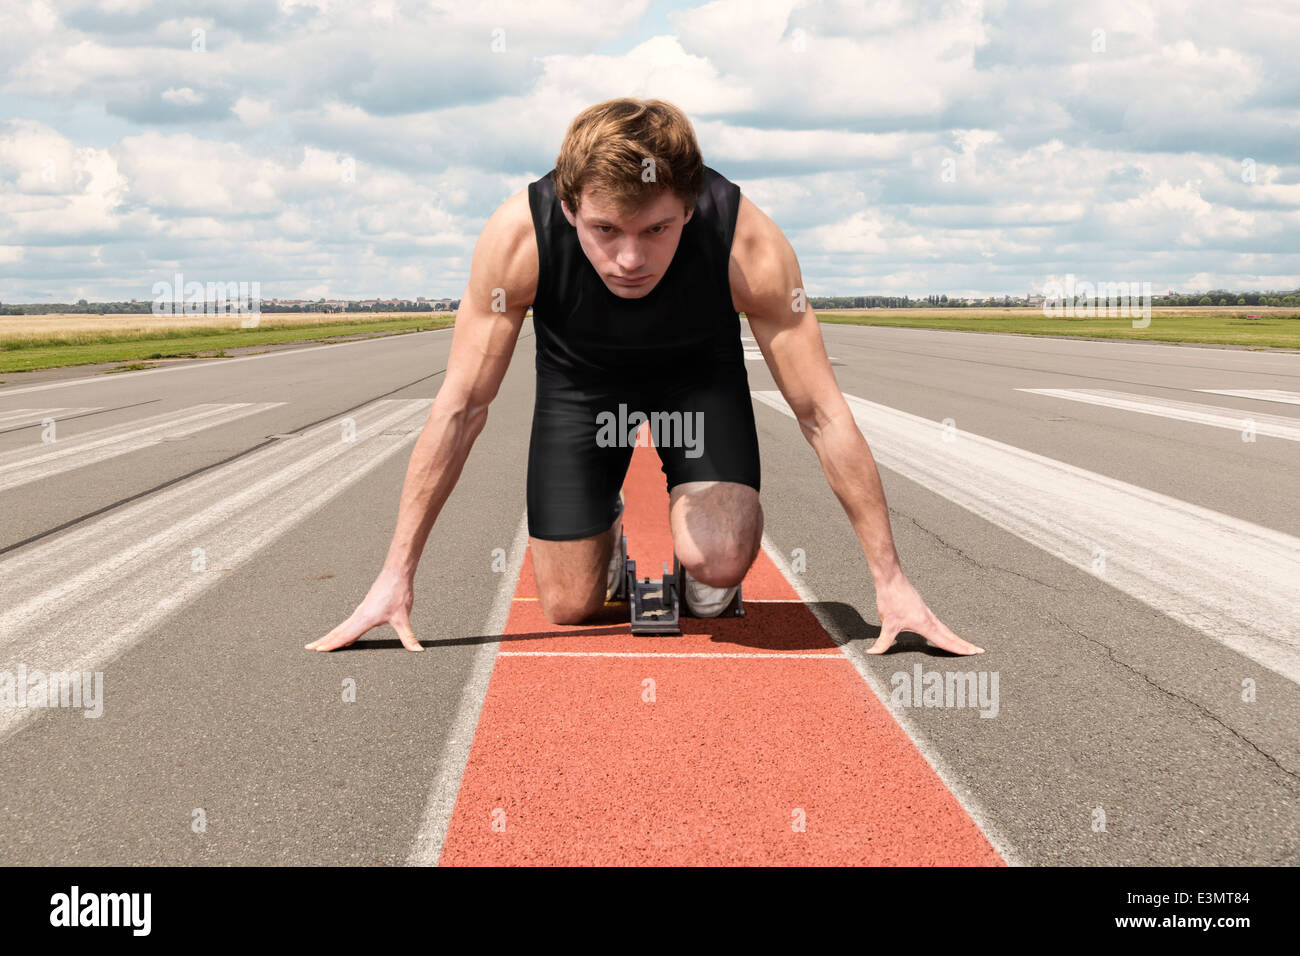 Male athlete on airport runway preparing for his start Stock Photo